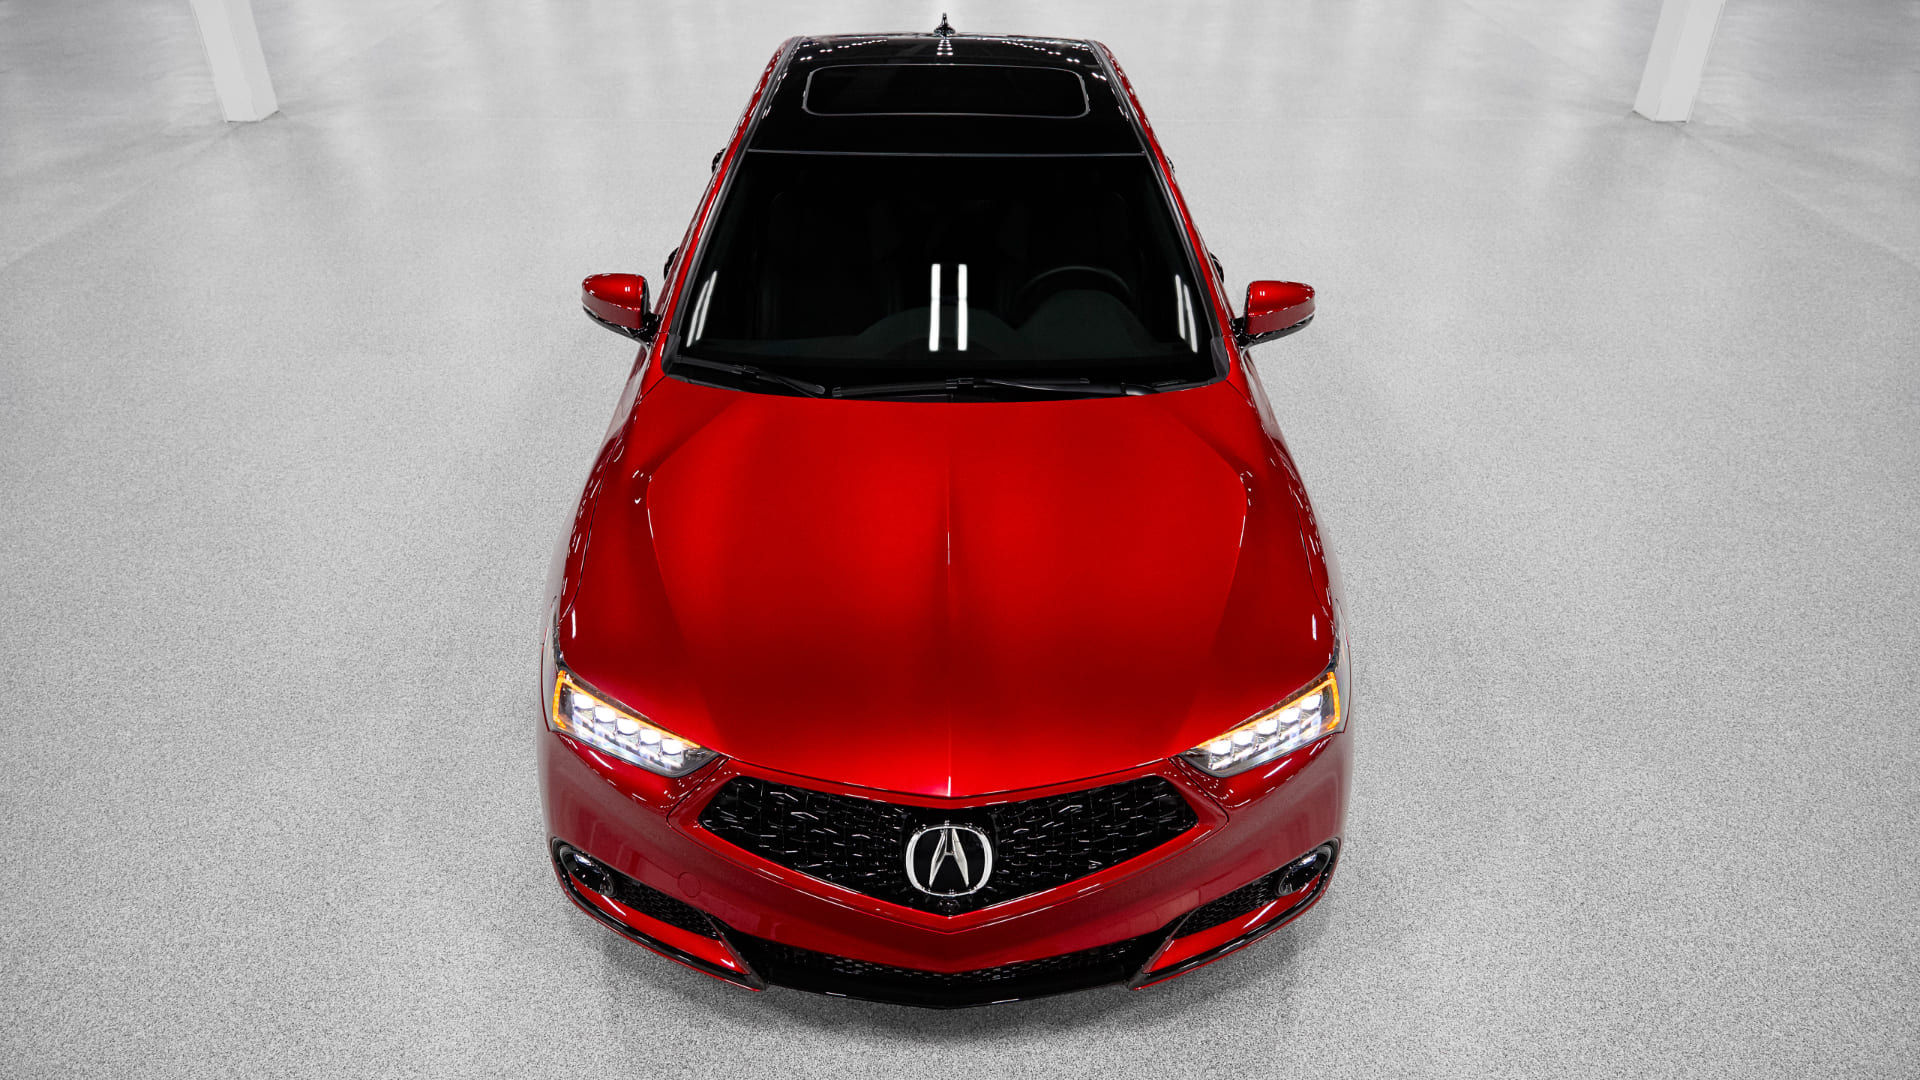 Acura TLX, Best quality wallpapers, Download free backgrounds, 1920x1080 Full HD Desktop